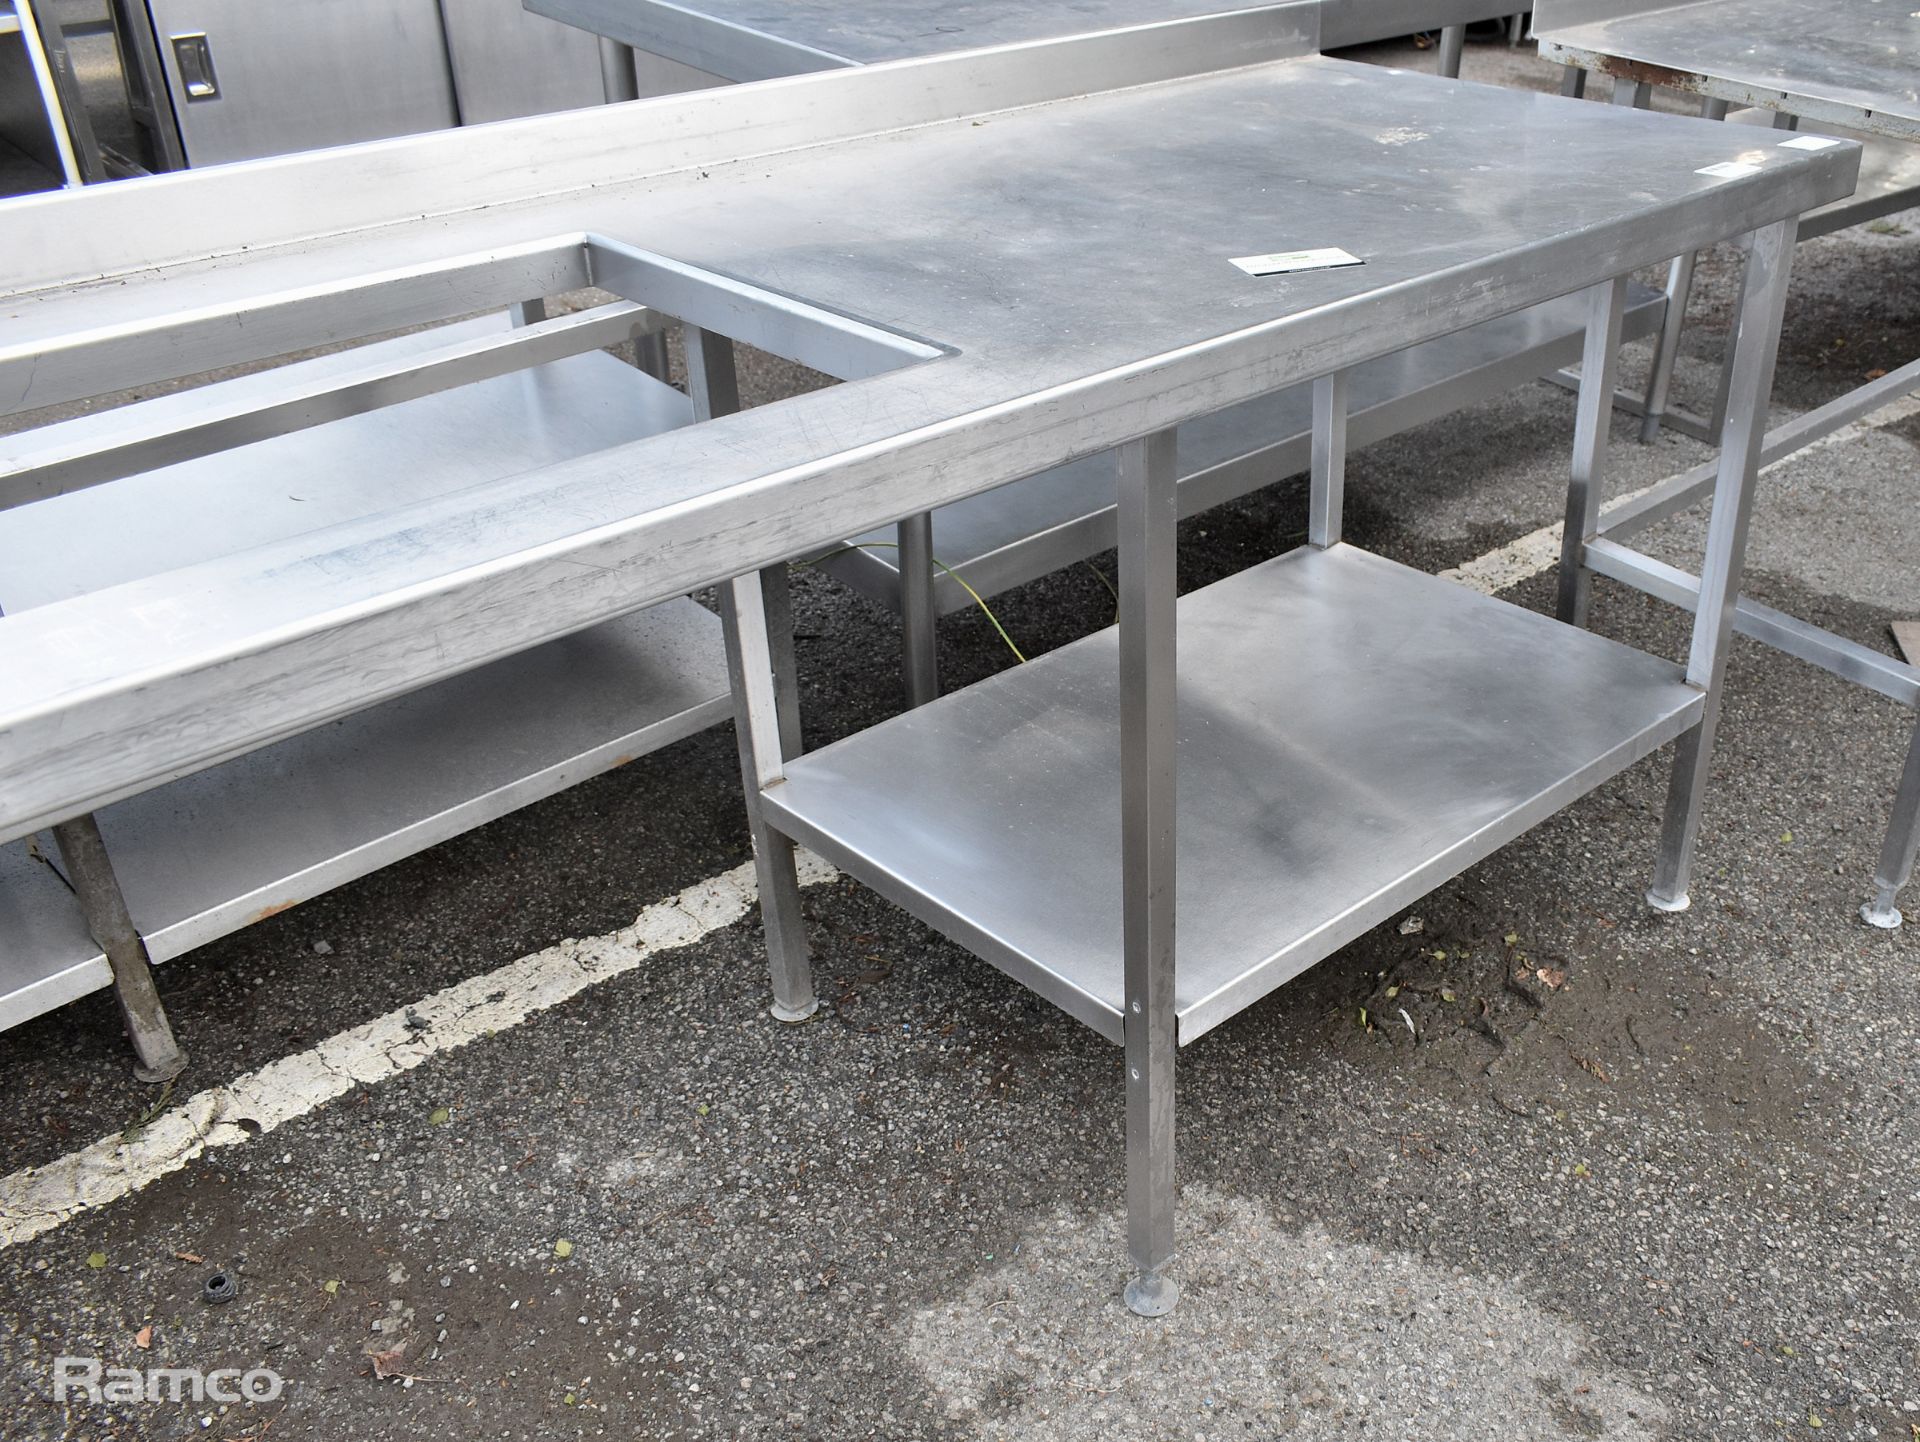 Stainless steel table with bottom shelf and rectangular cut out - L 193 x W 70 x H 90cm - Image 4 of 4